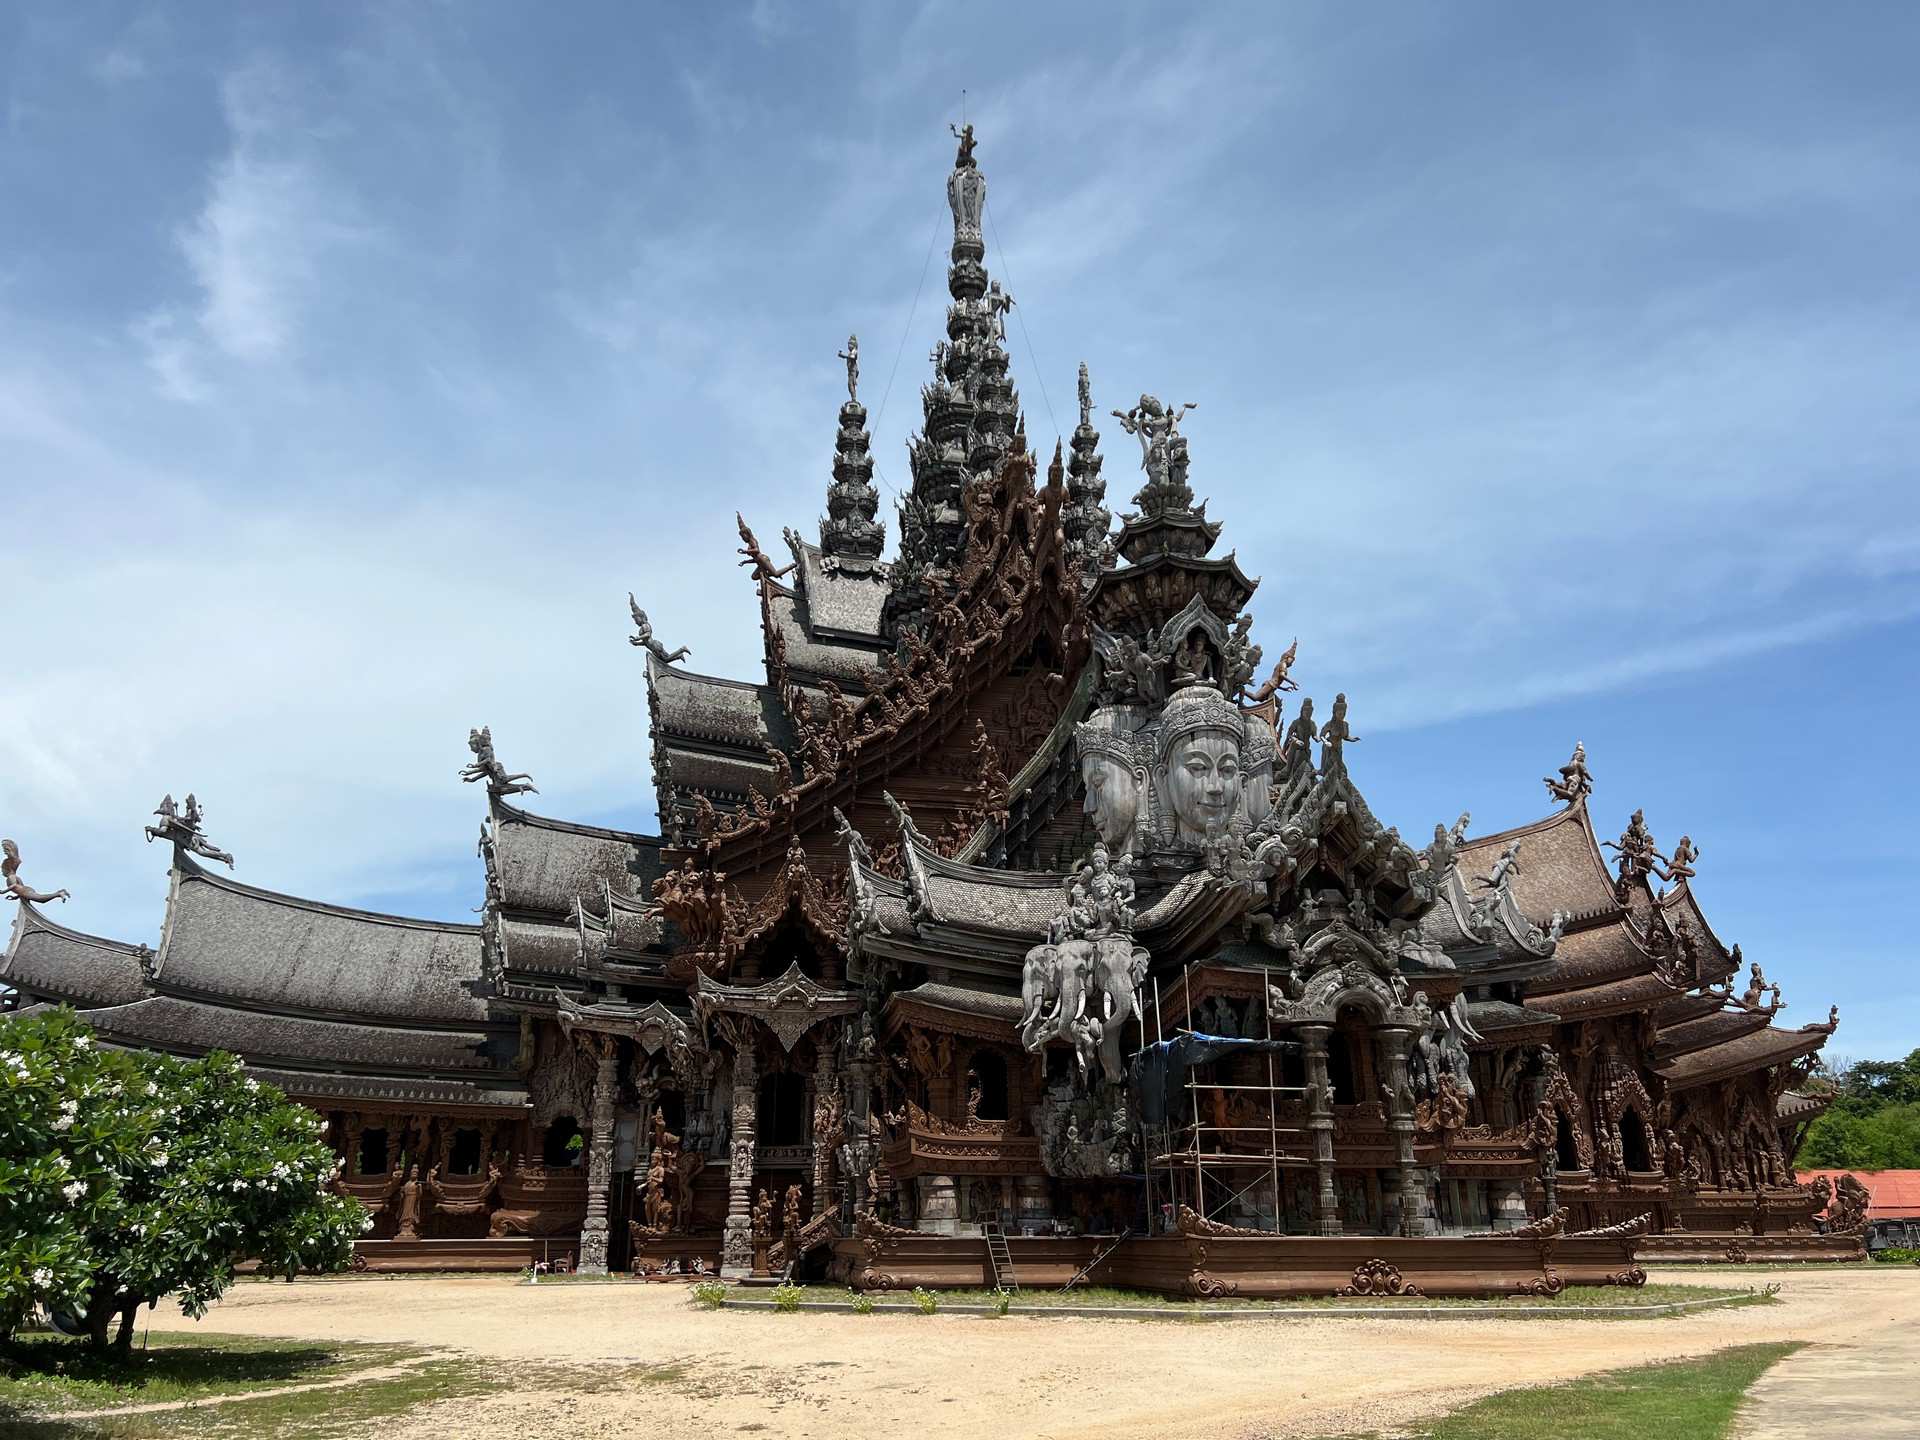 The Sanctuary of Truth in Pattaya, Thailand. A Mcdonalds feast and the Sanctuary of Truth